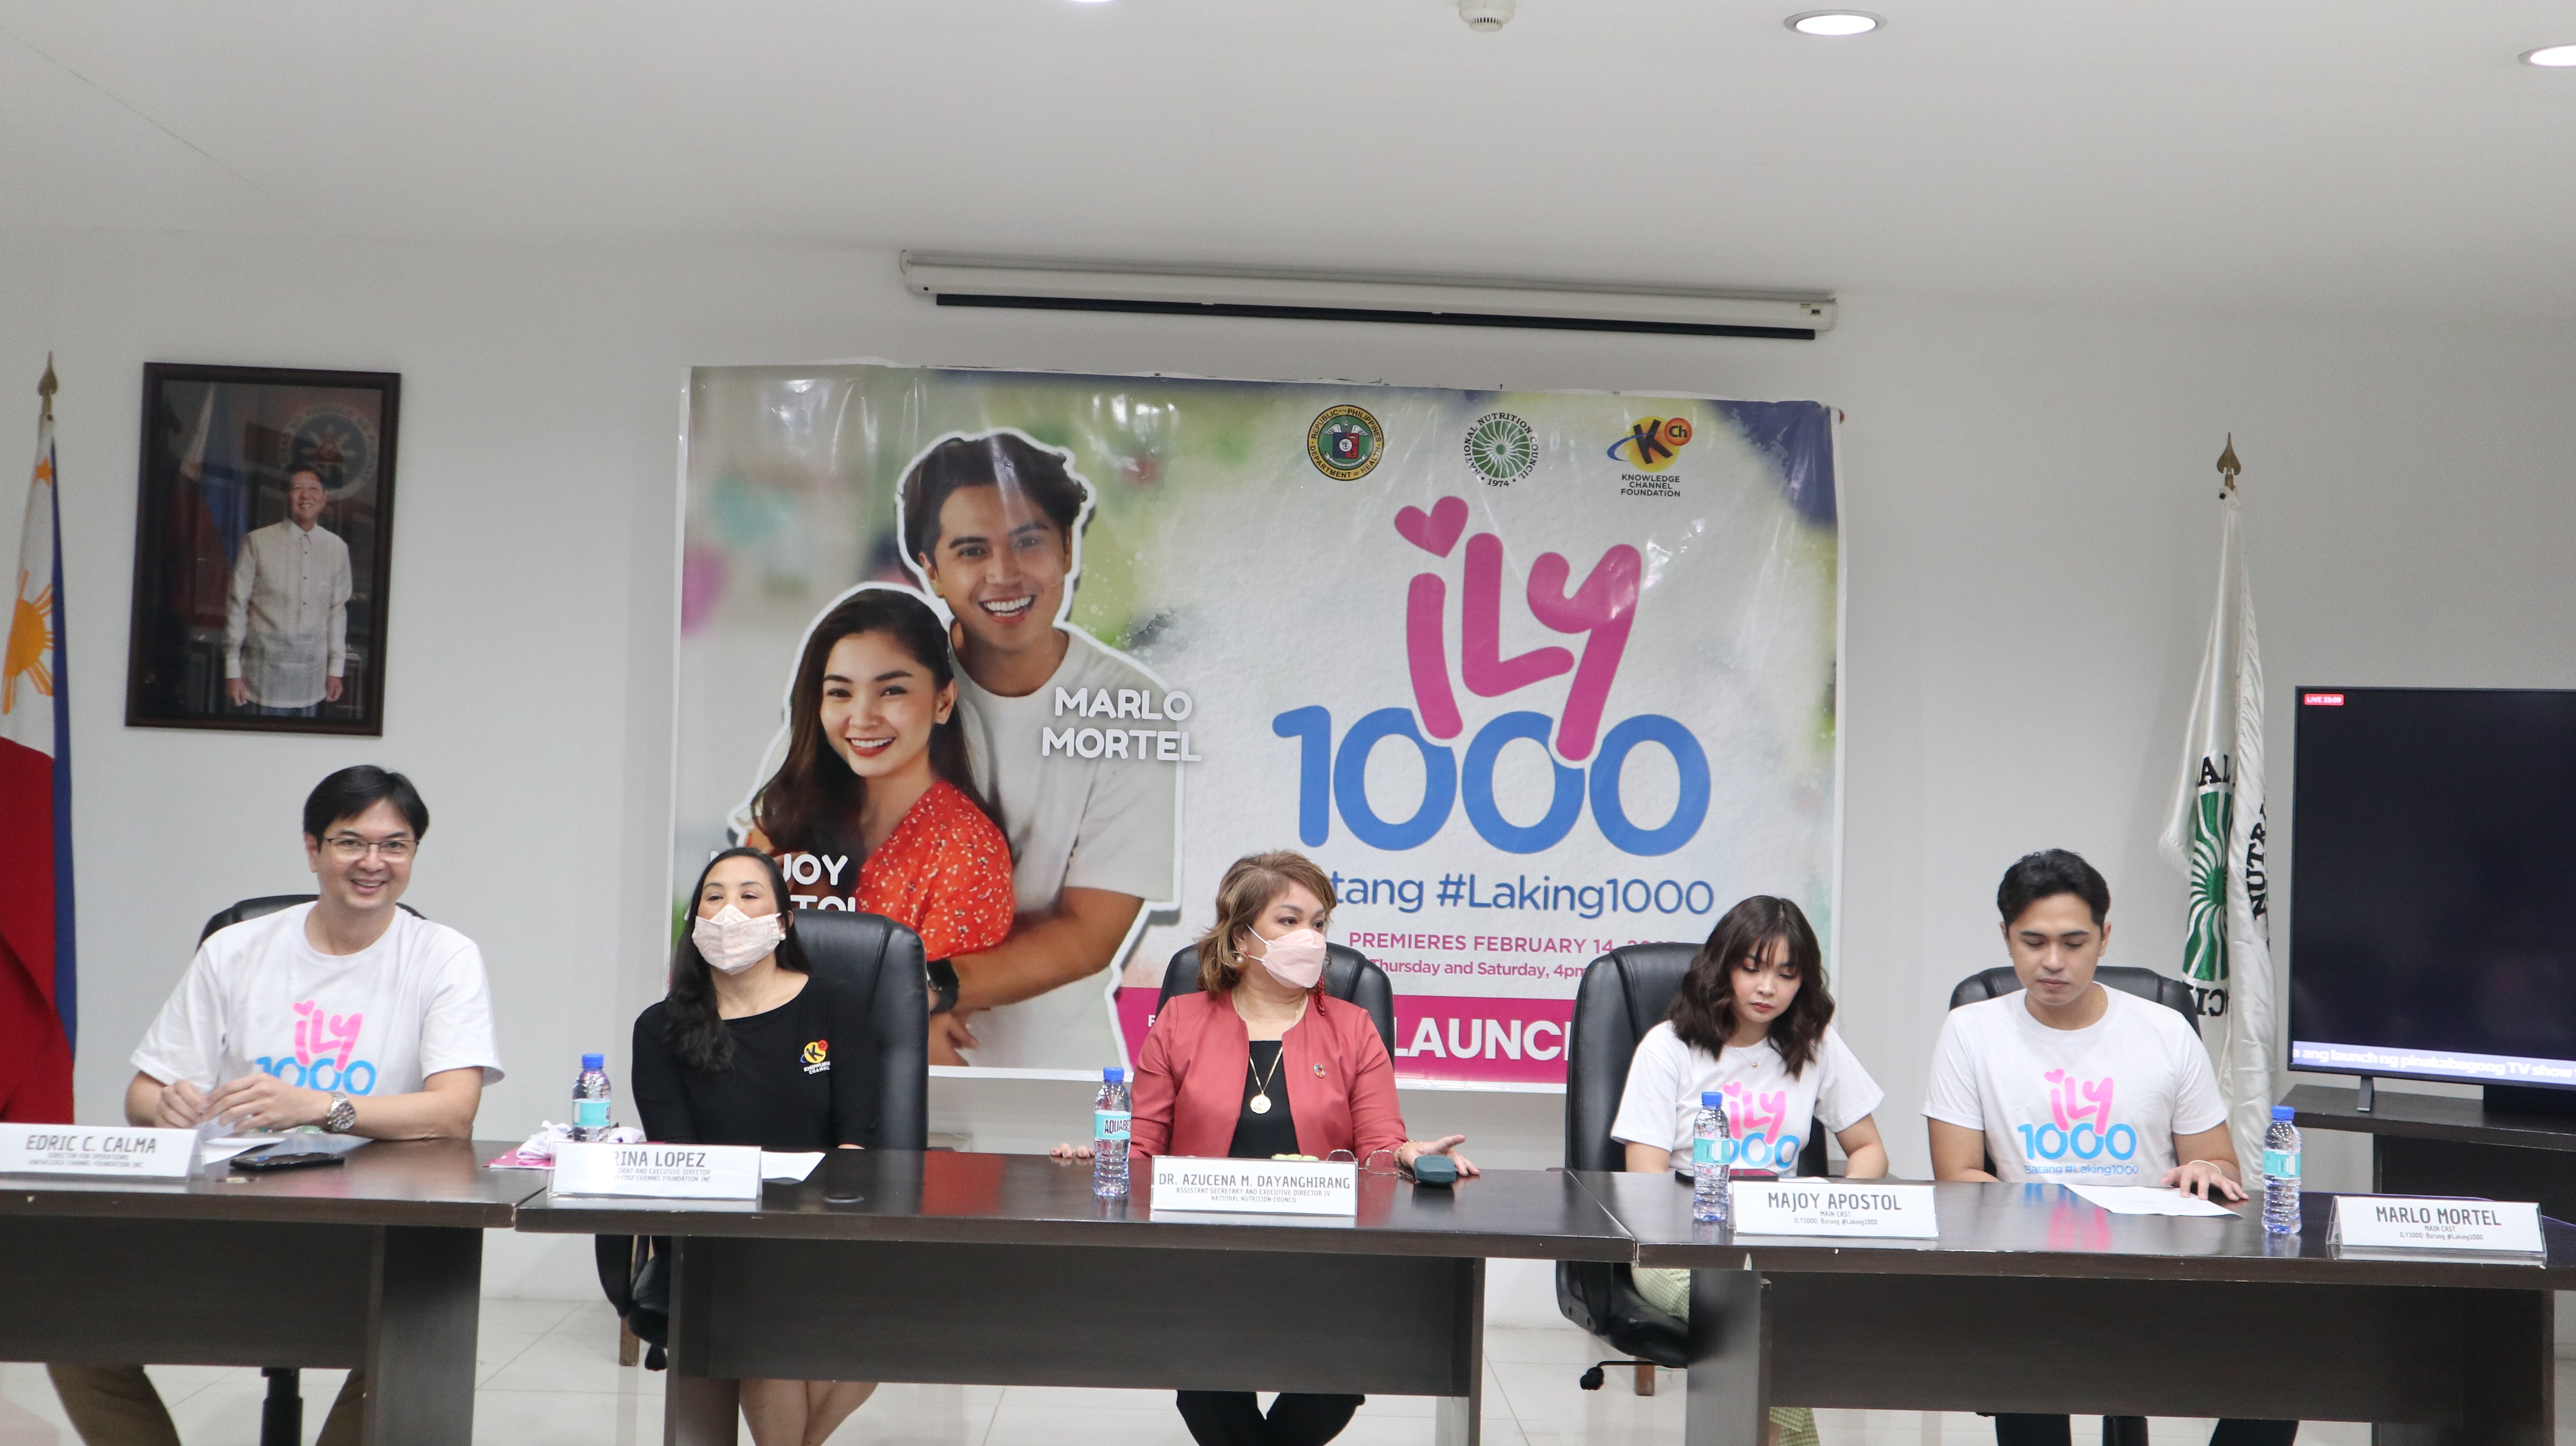 Knowledge Channel joins forces with National Nutrition Council in new tv series, “ILY 1000”